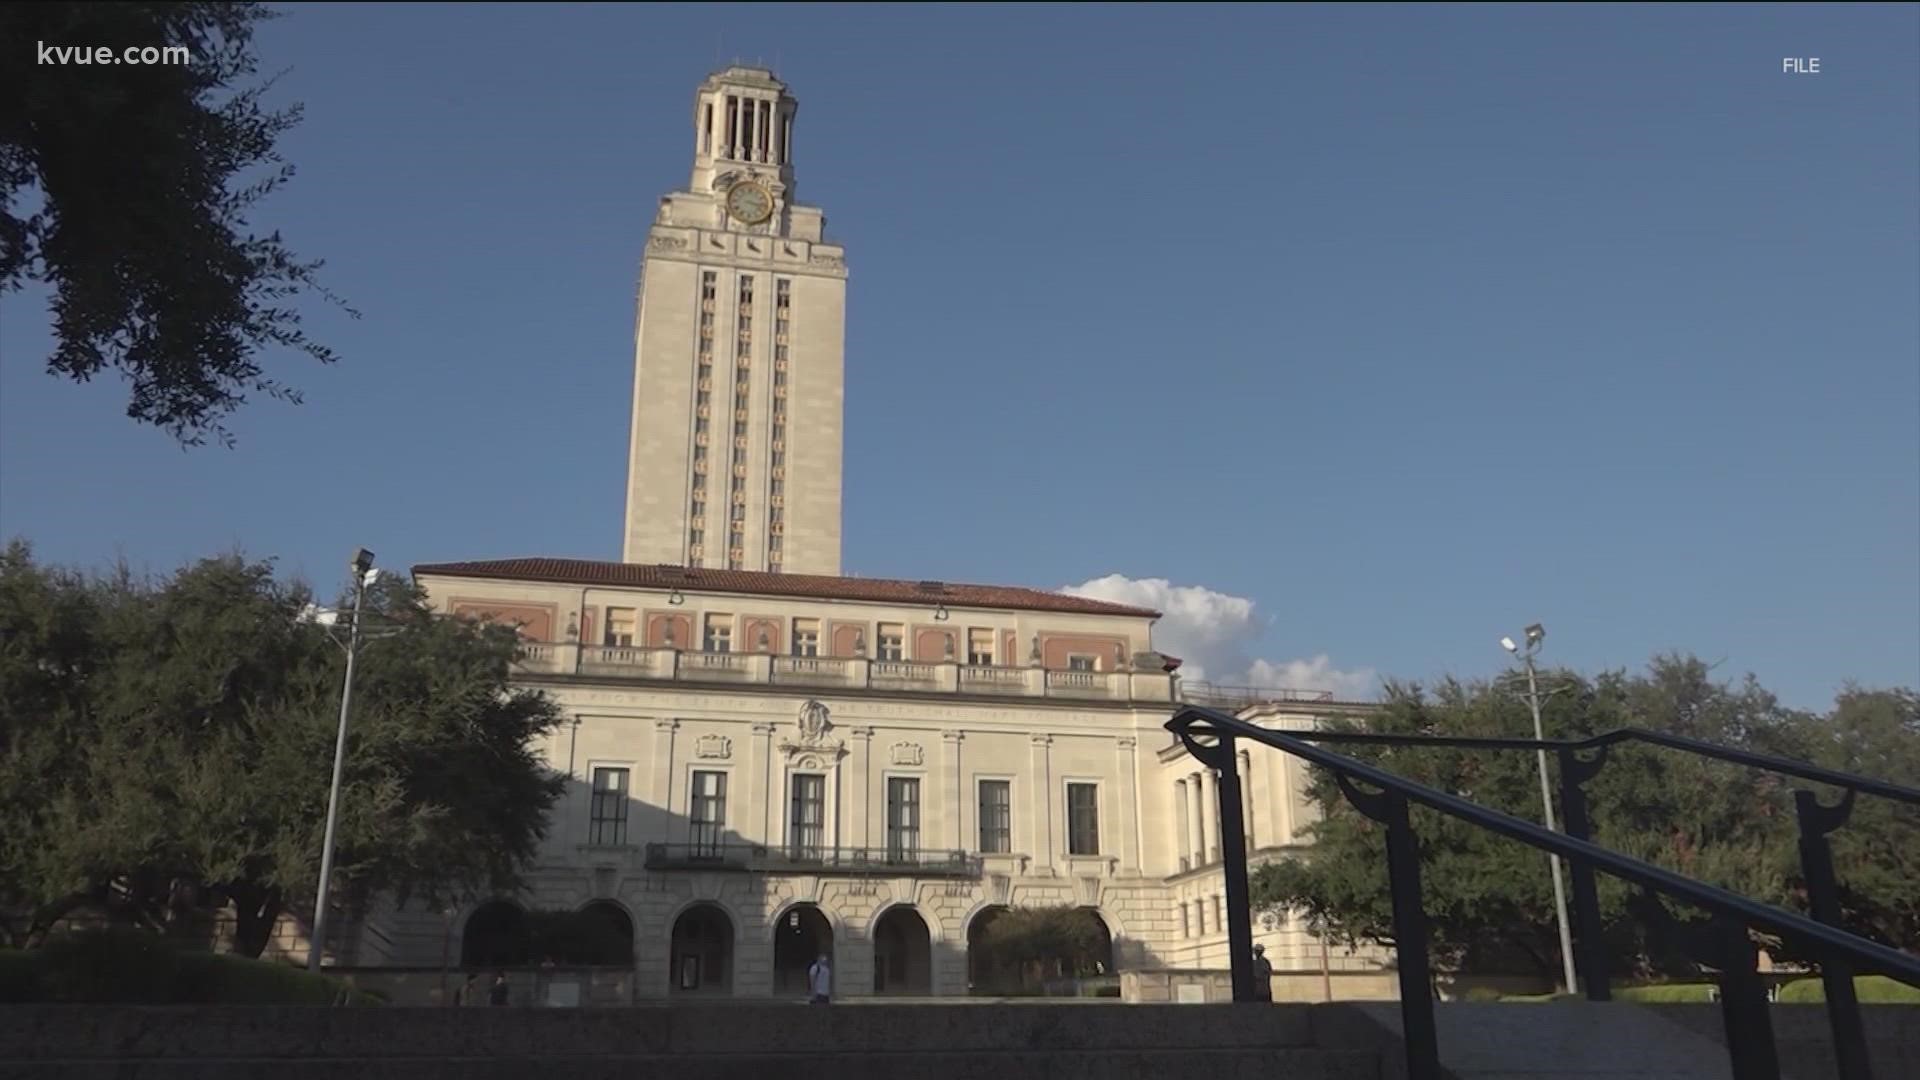 With vaccine mandates banned, Texas public universities, including UT Austin, are offering concert tickets, free tuition and more to increase vaccination rates.